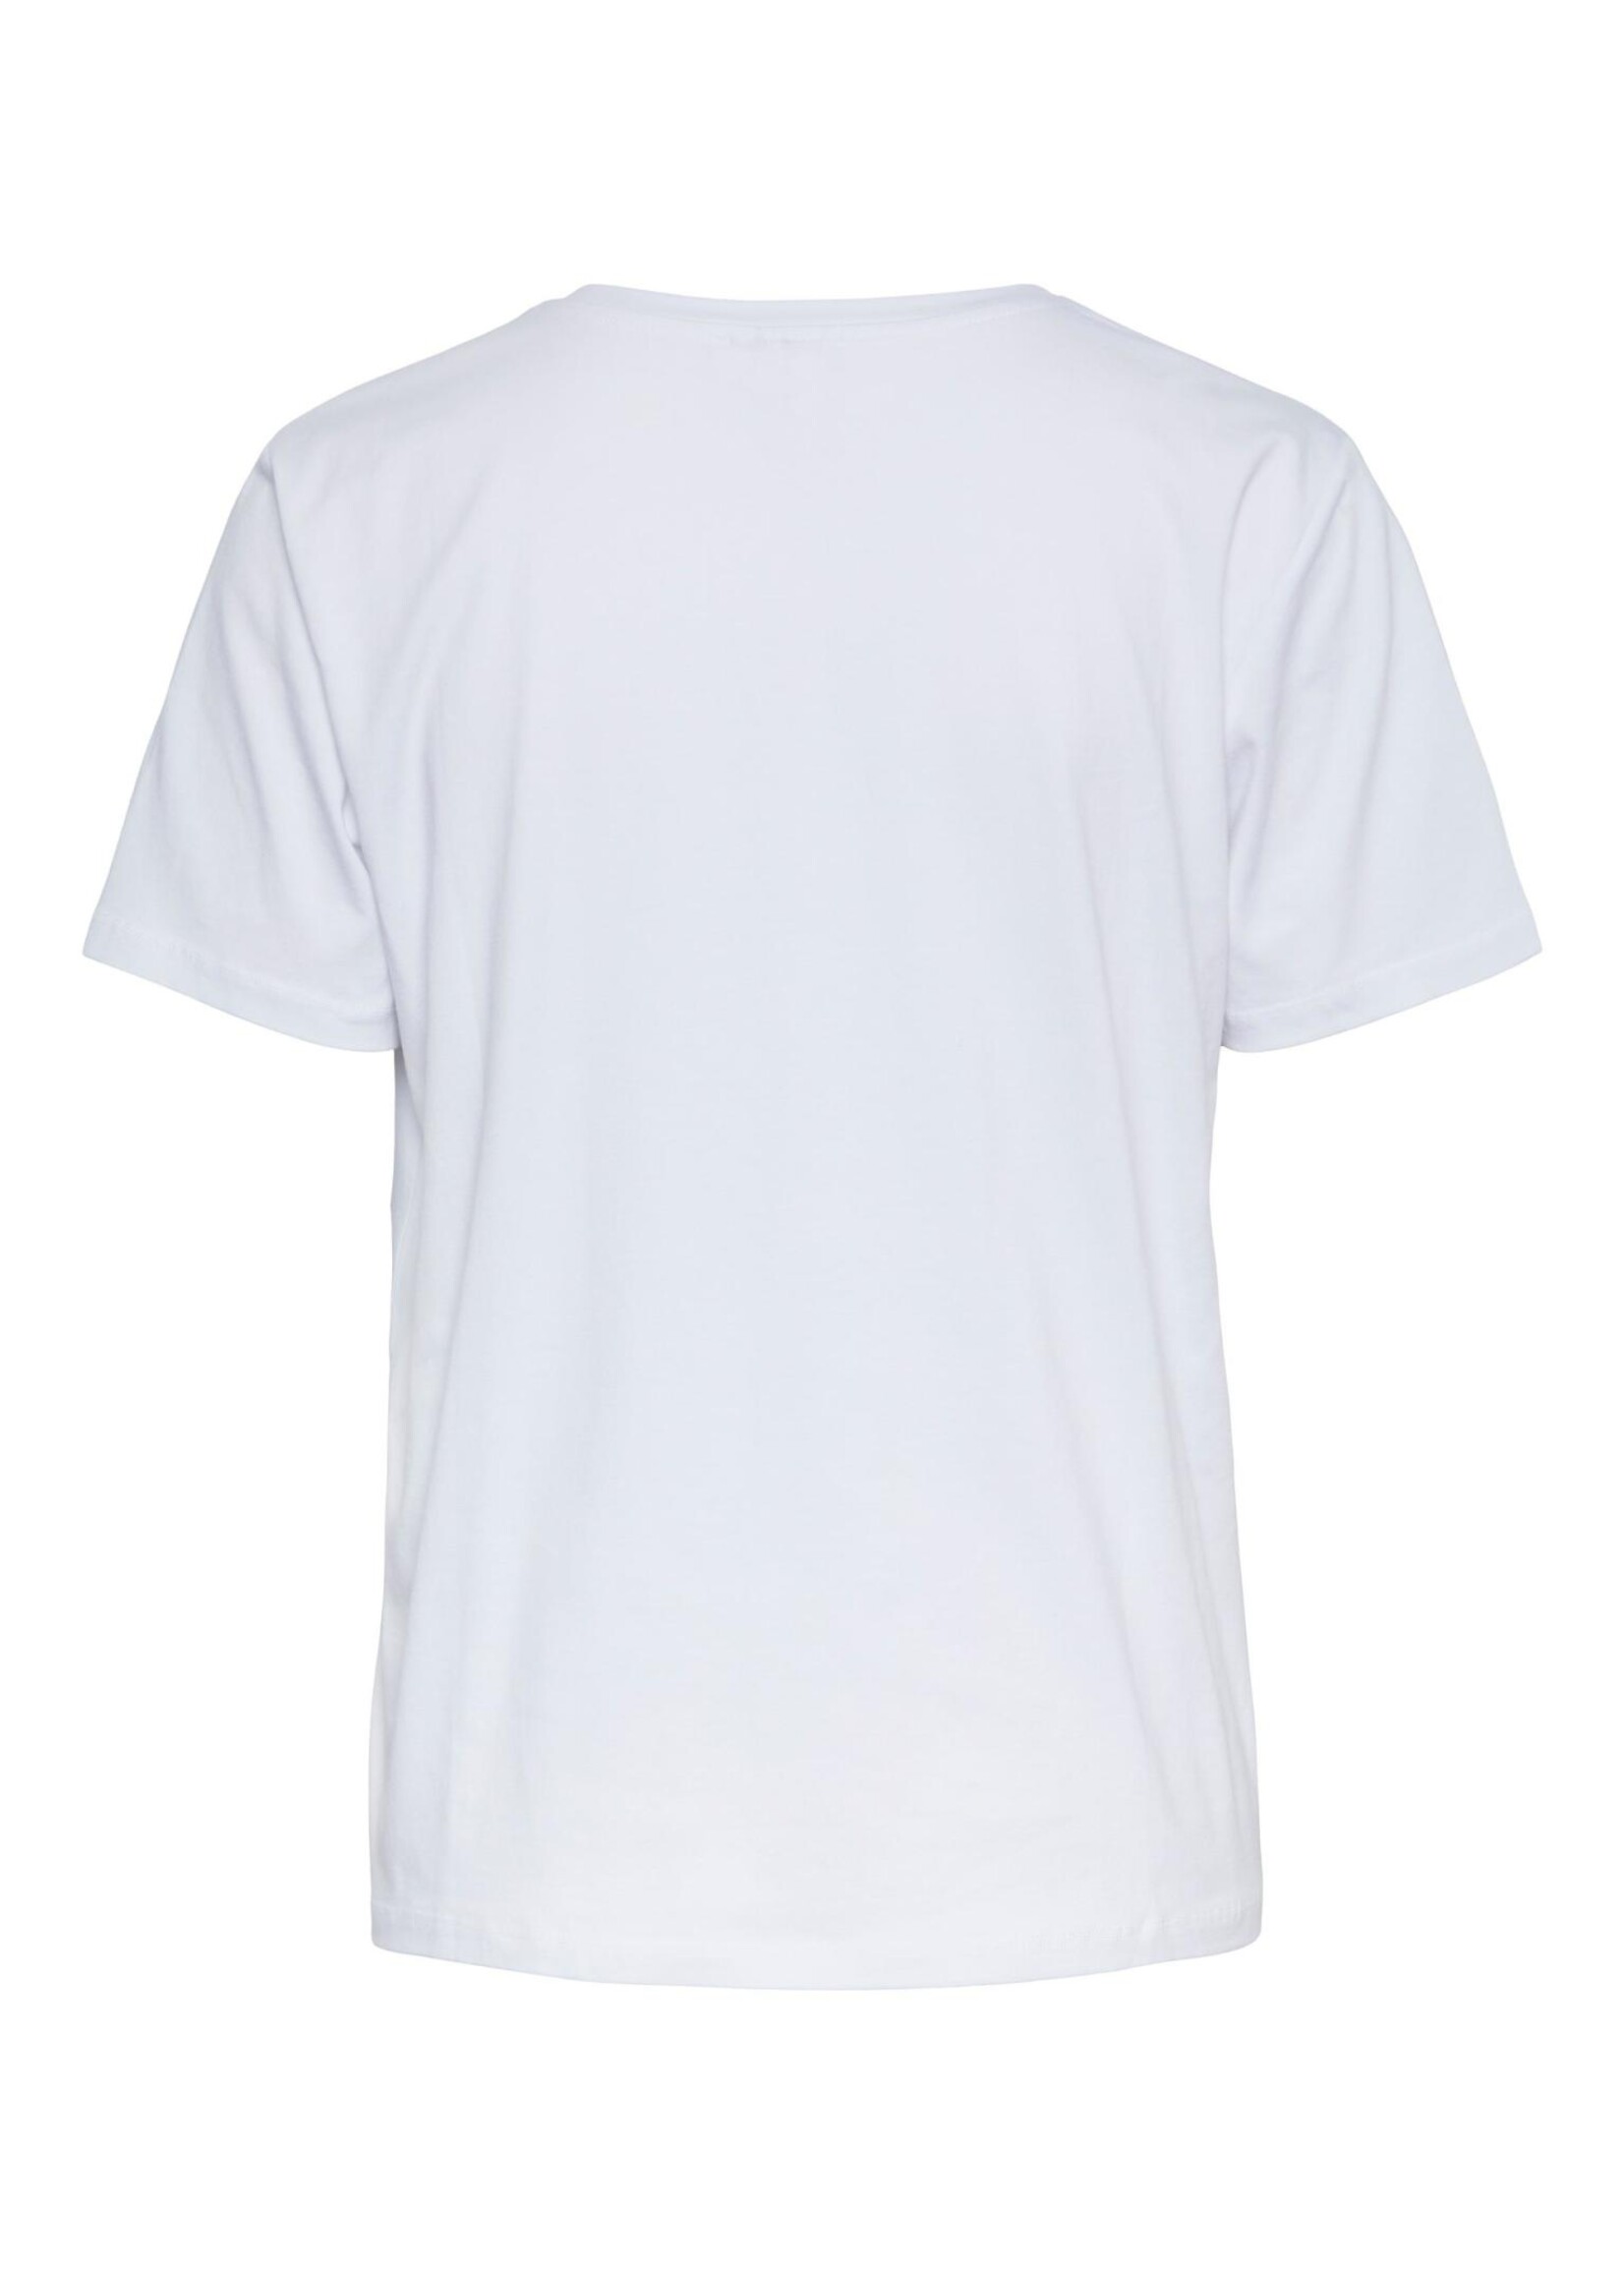 PIECES JACE SS TEE BOX D2D bright white whatever